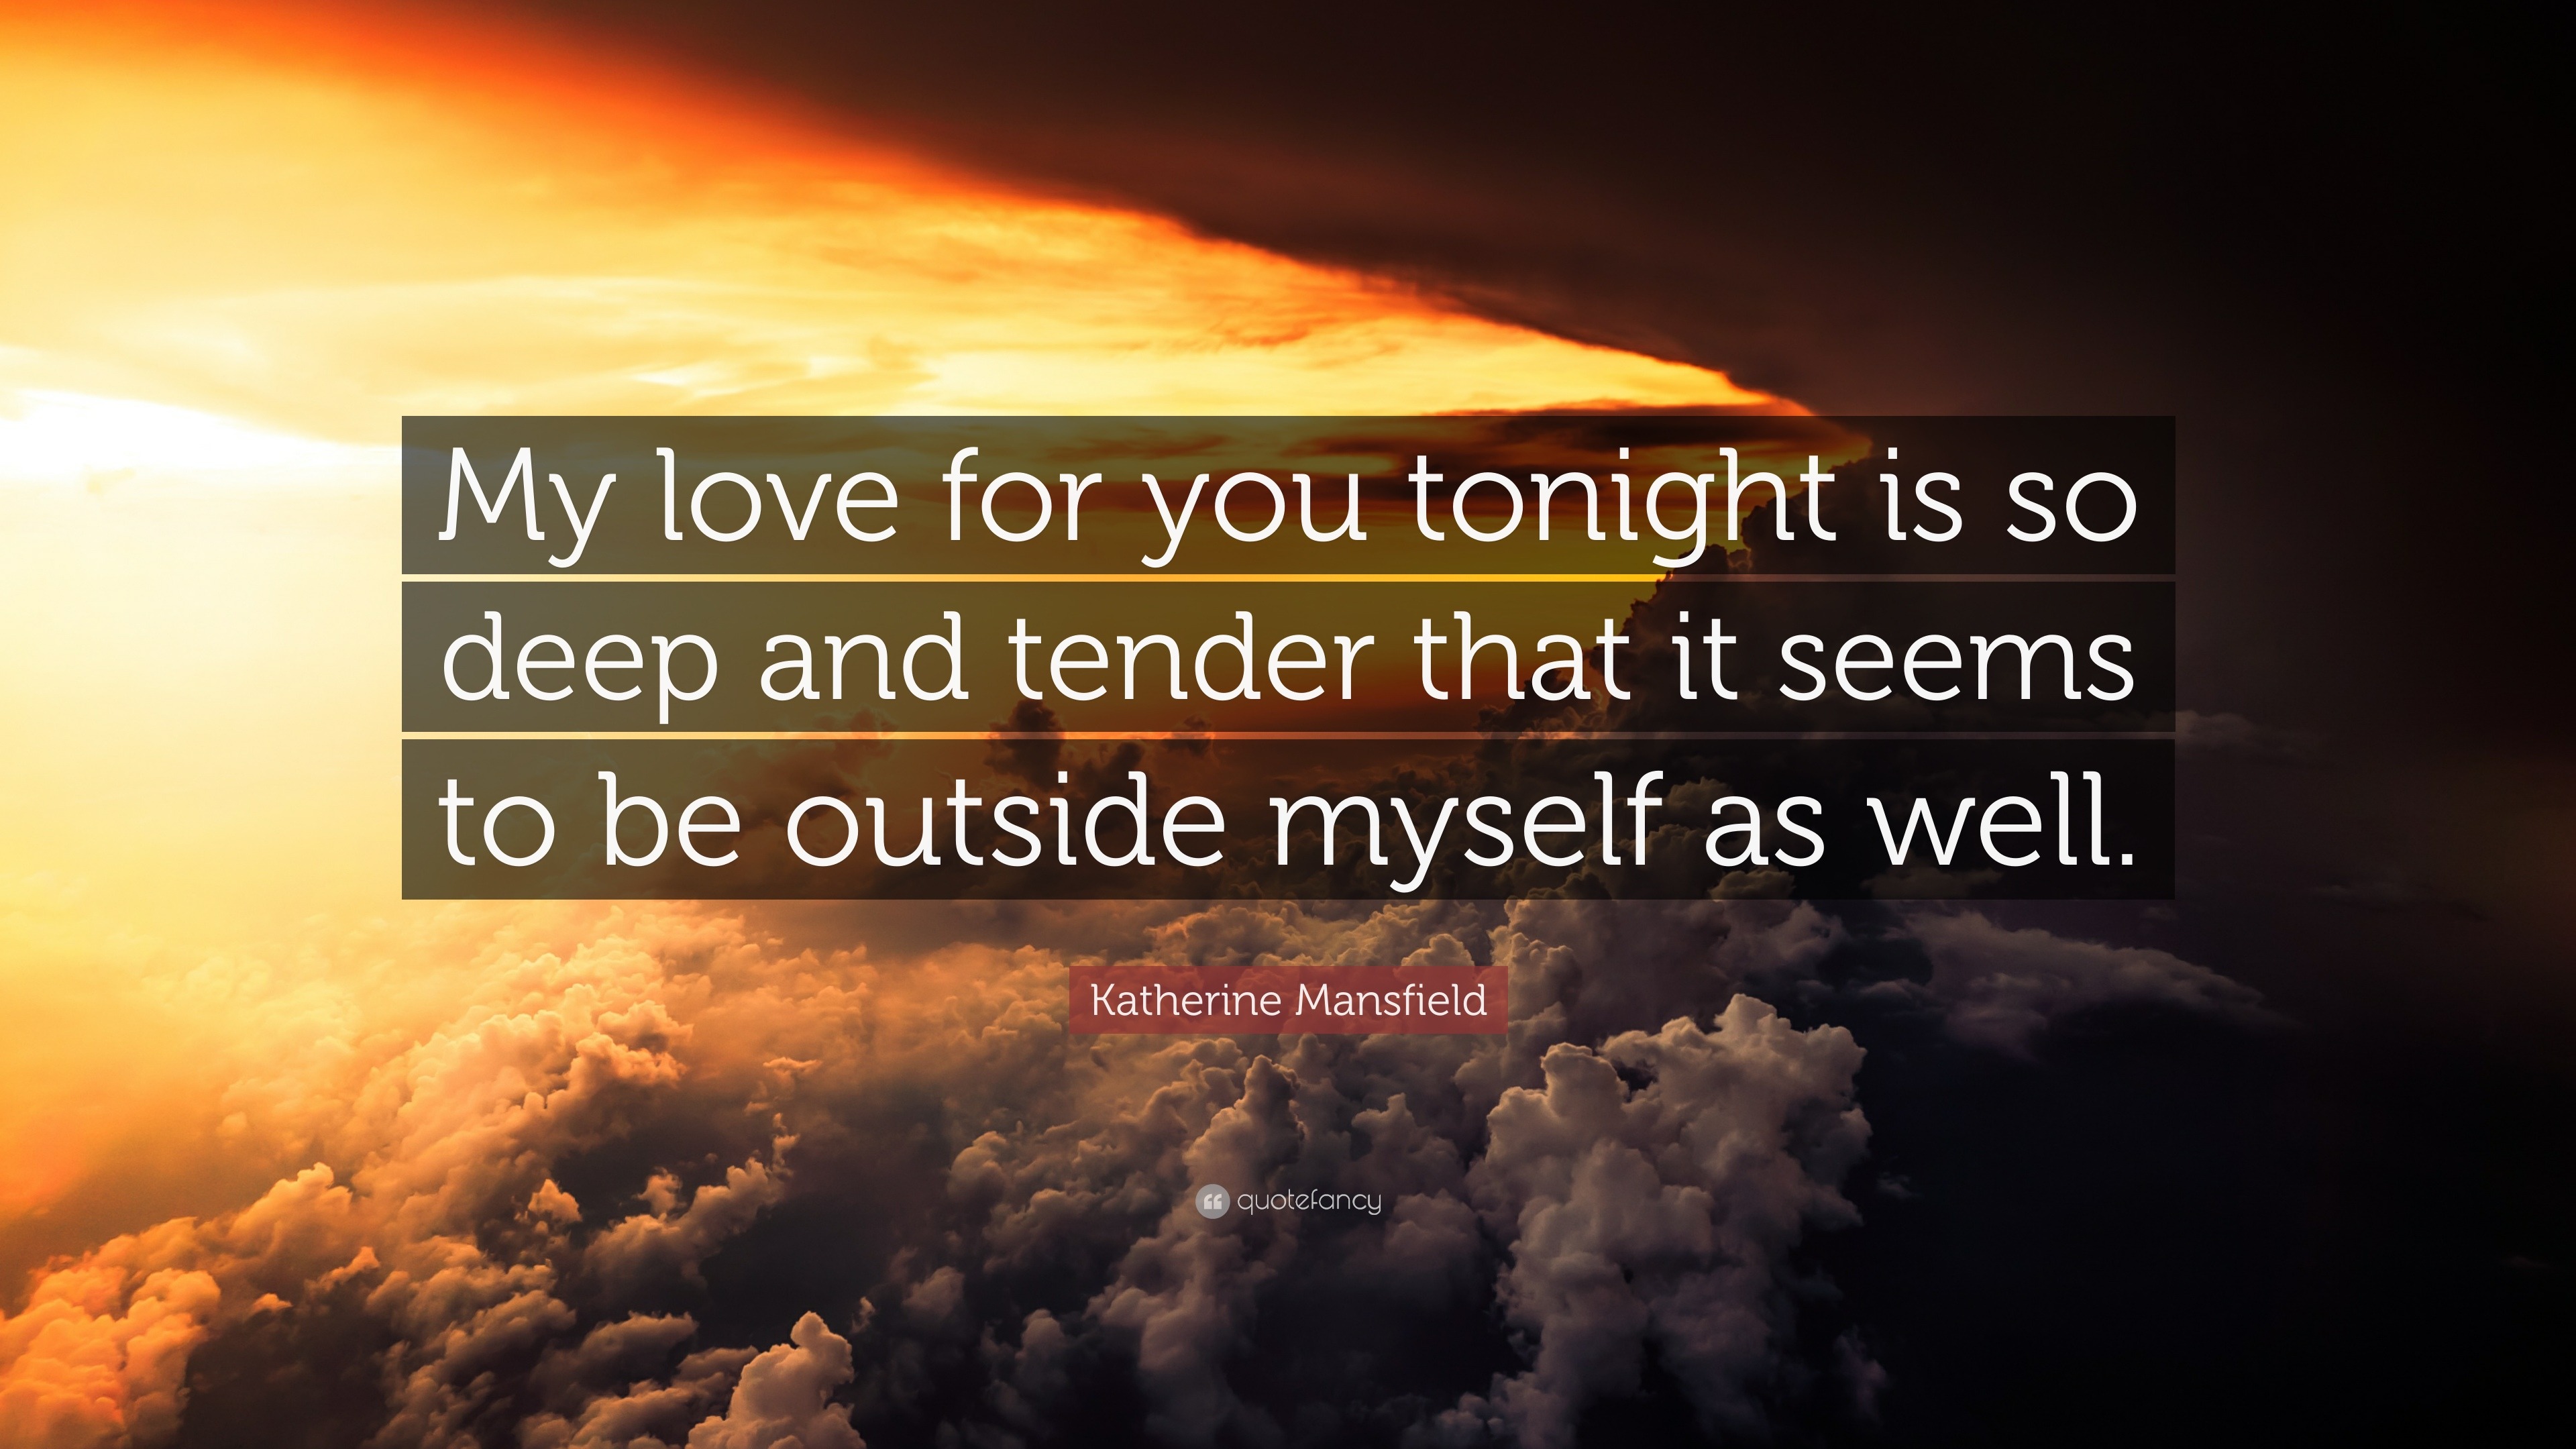 Katherine Mansfield Quote “My love for you tonight is so deep and tender that